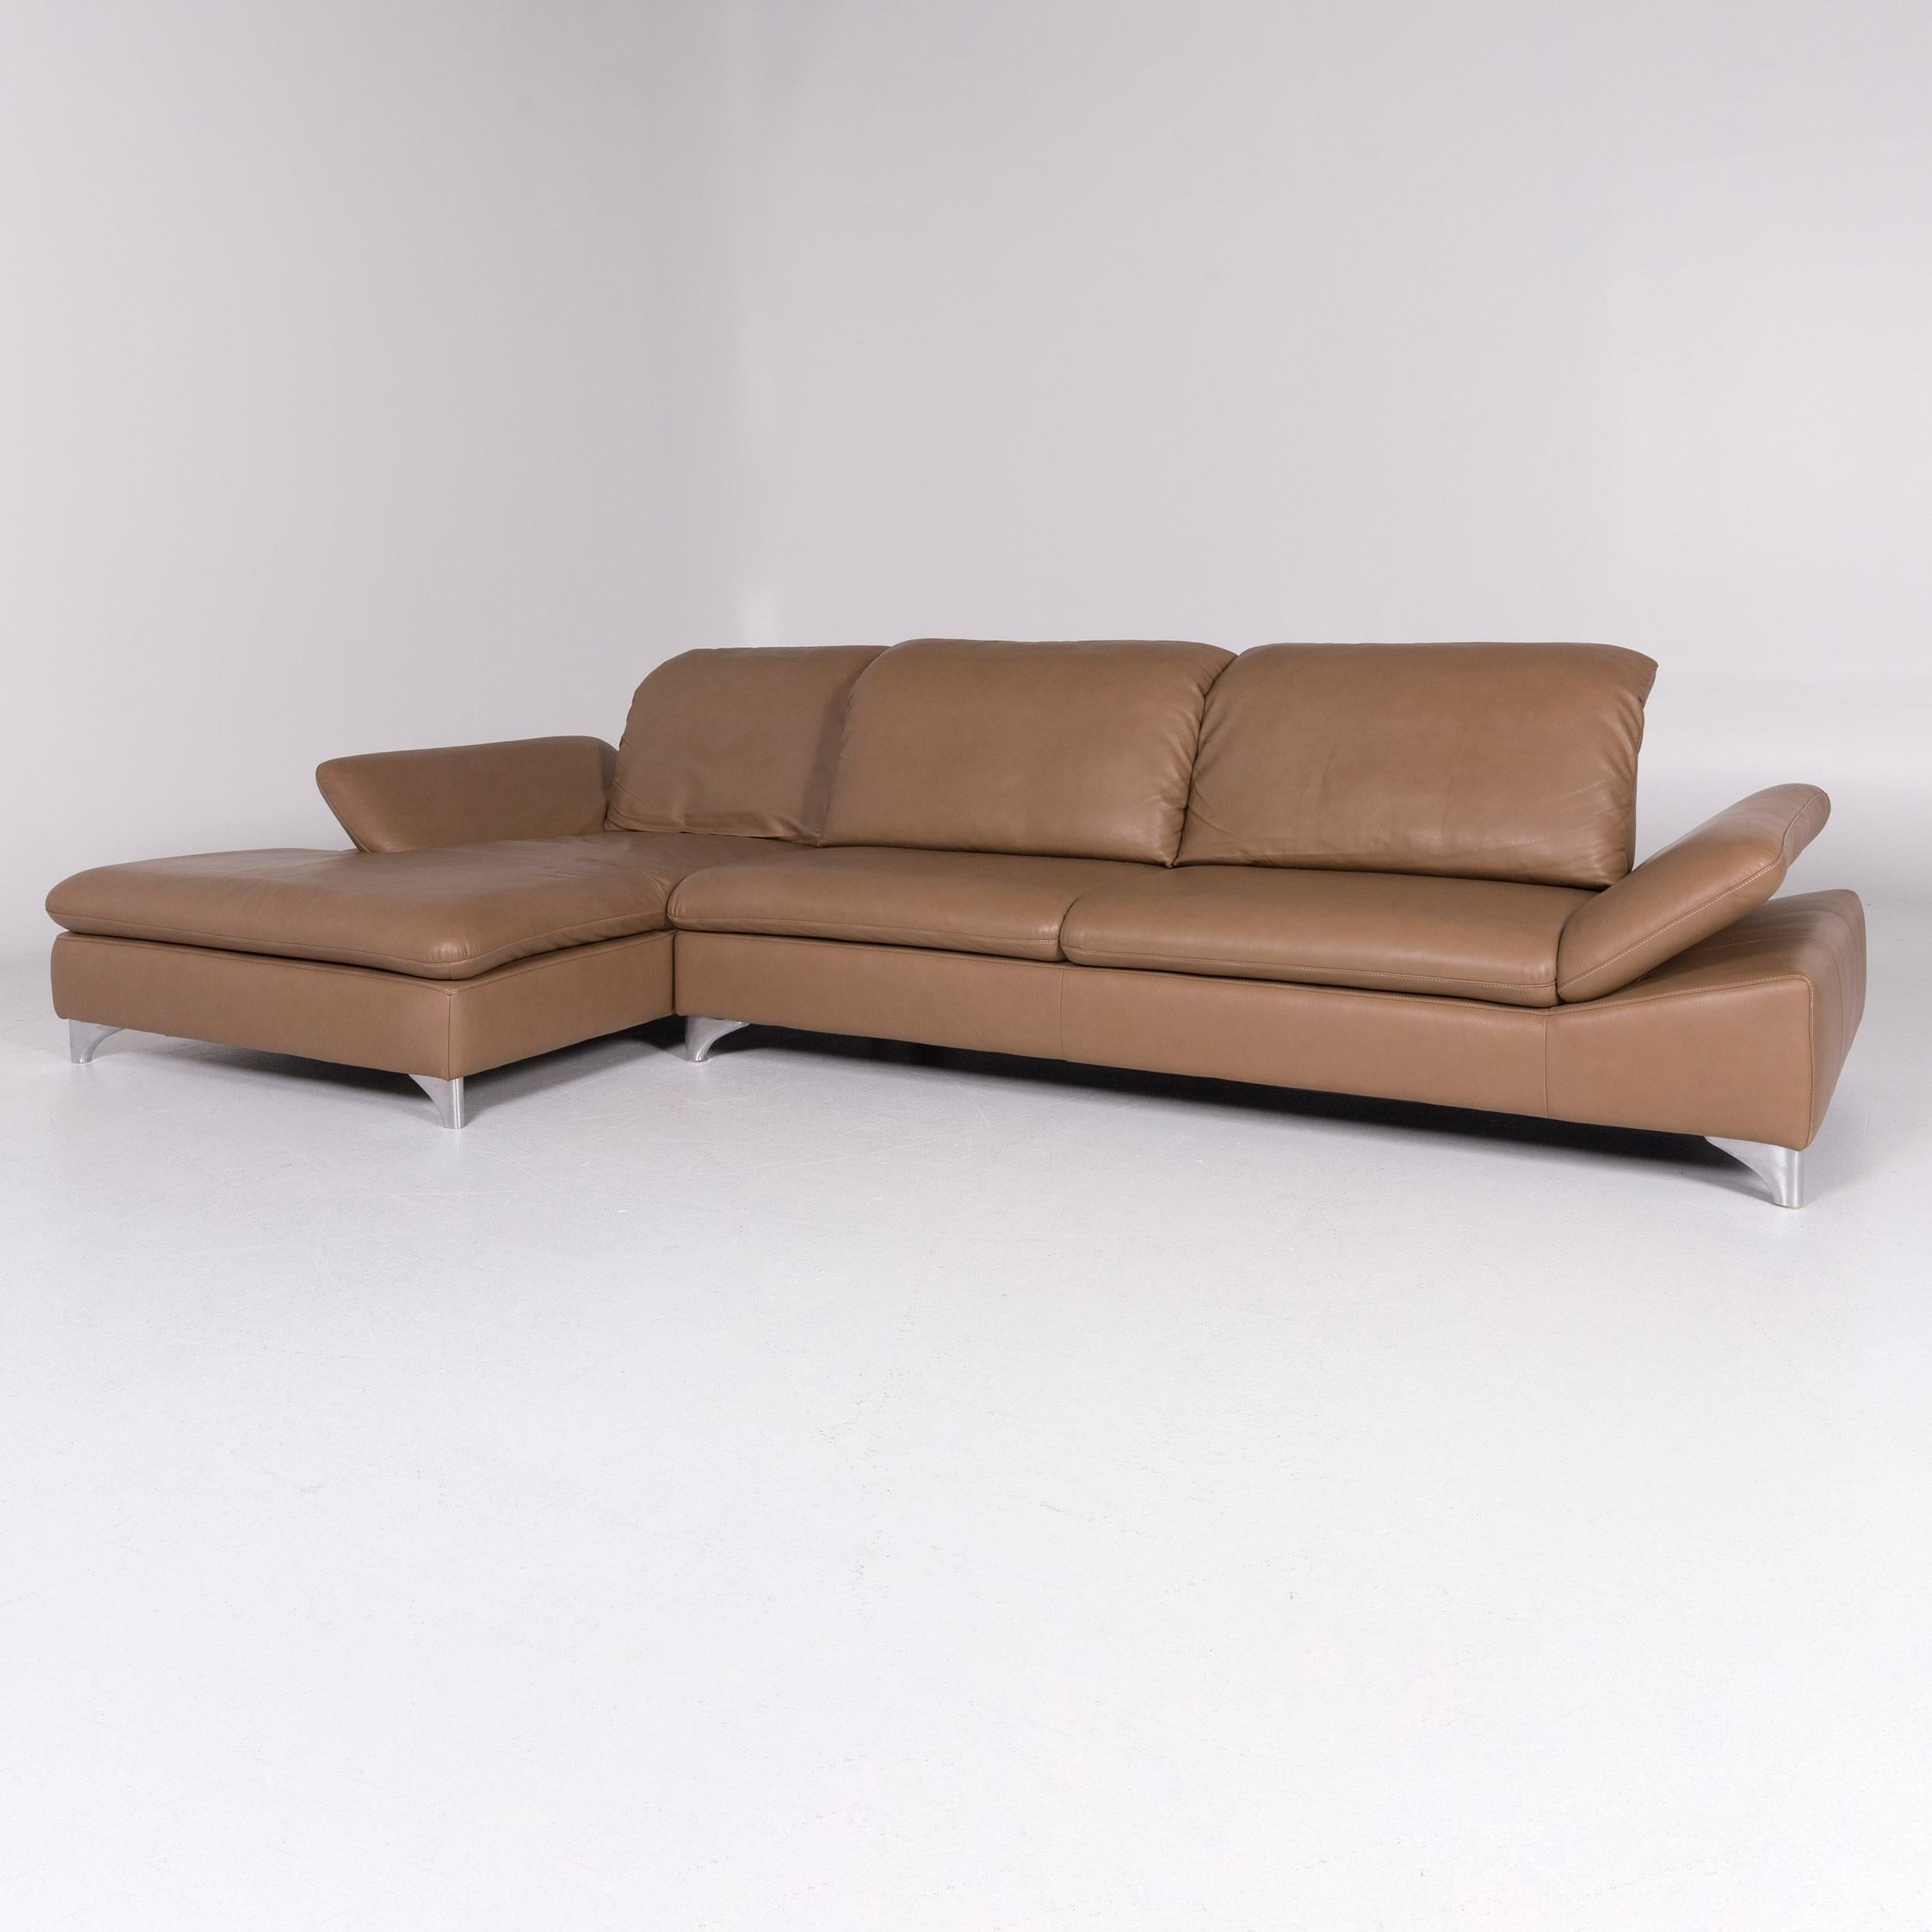 We bring to you an Ewald Schillig leather sofa beige corner sofa.
 
 Product measurements in centimeters:
 
Depth 109
Width 174
Height 94
Seat-height 41
Rest-height 51
Seat-depth 54
Seat-width 255
Back-height 46.
 